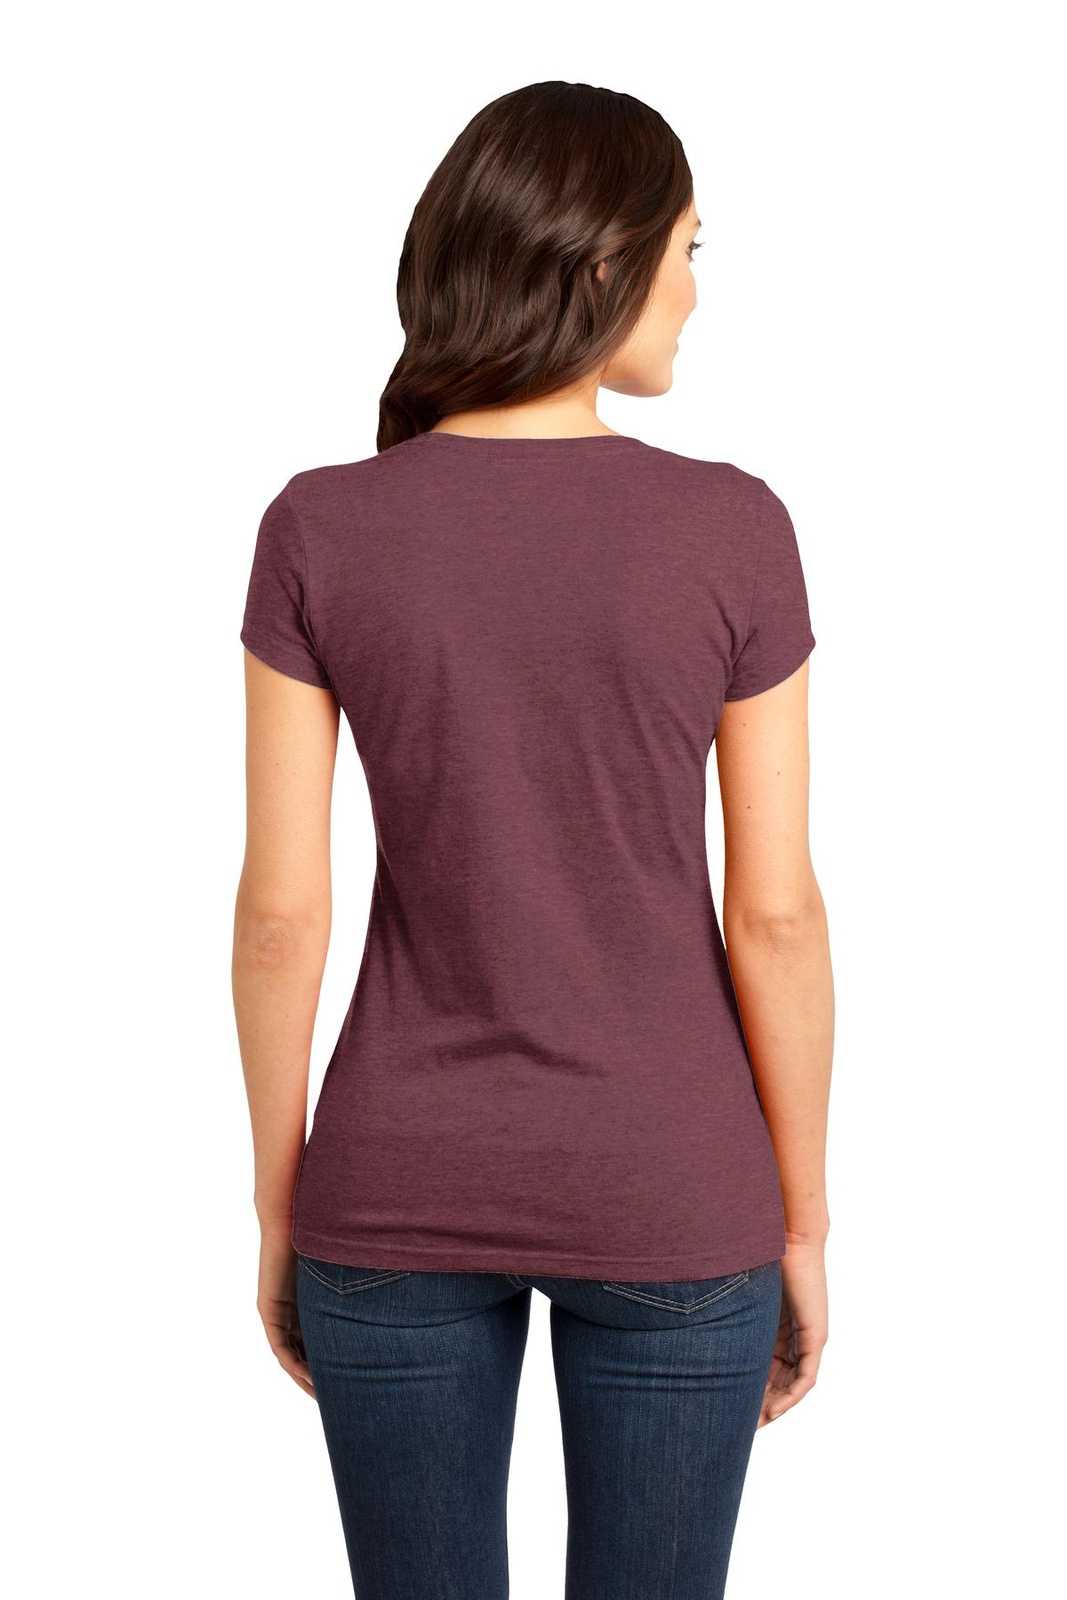 District DT6001 Women's Fitted Very Important Tee - Heathered Cardinal - HIT a Double - 1